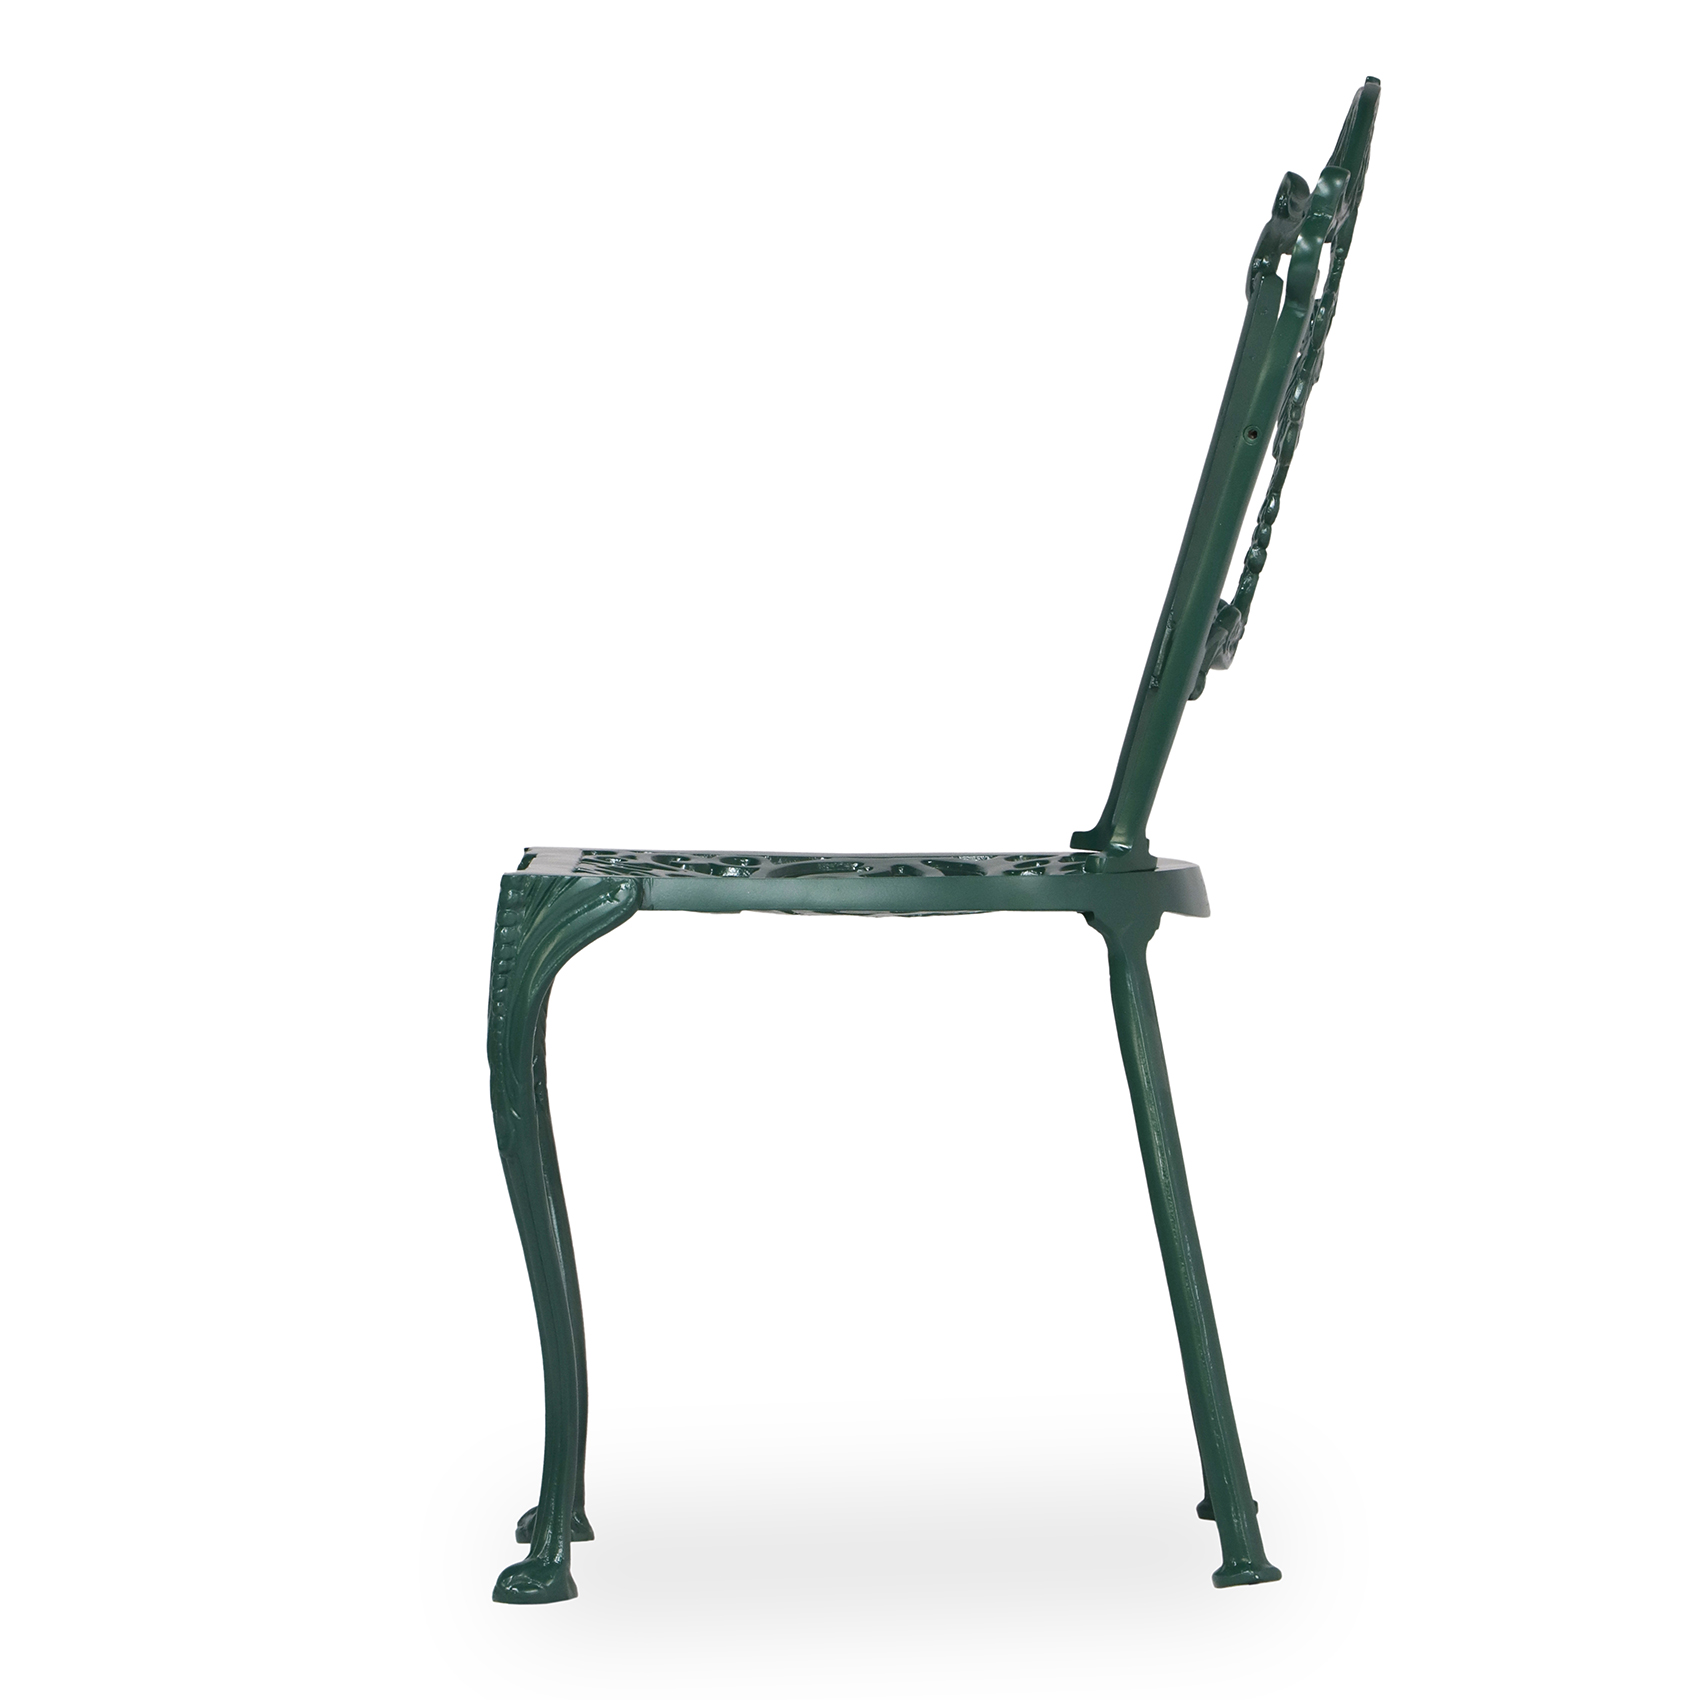 side view of green garden diner chair